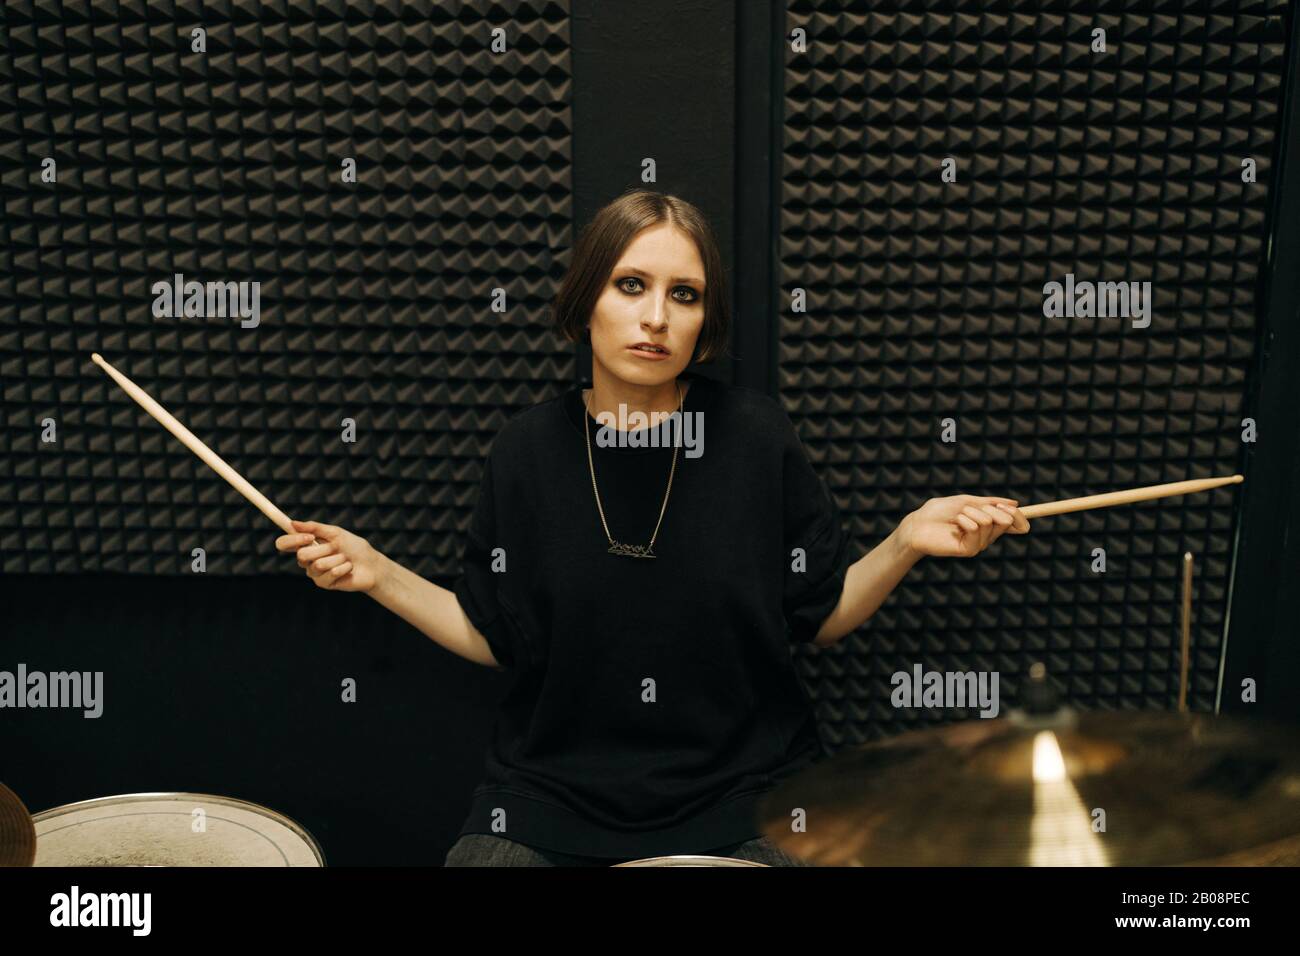 Young woman playing drums, selective focus Stock Photo